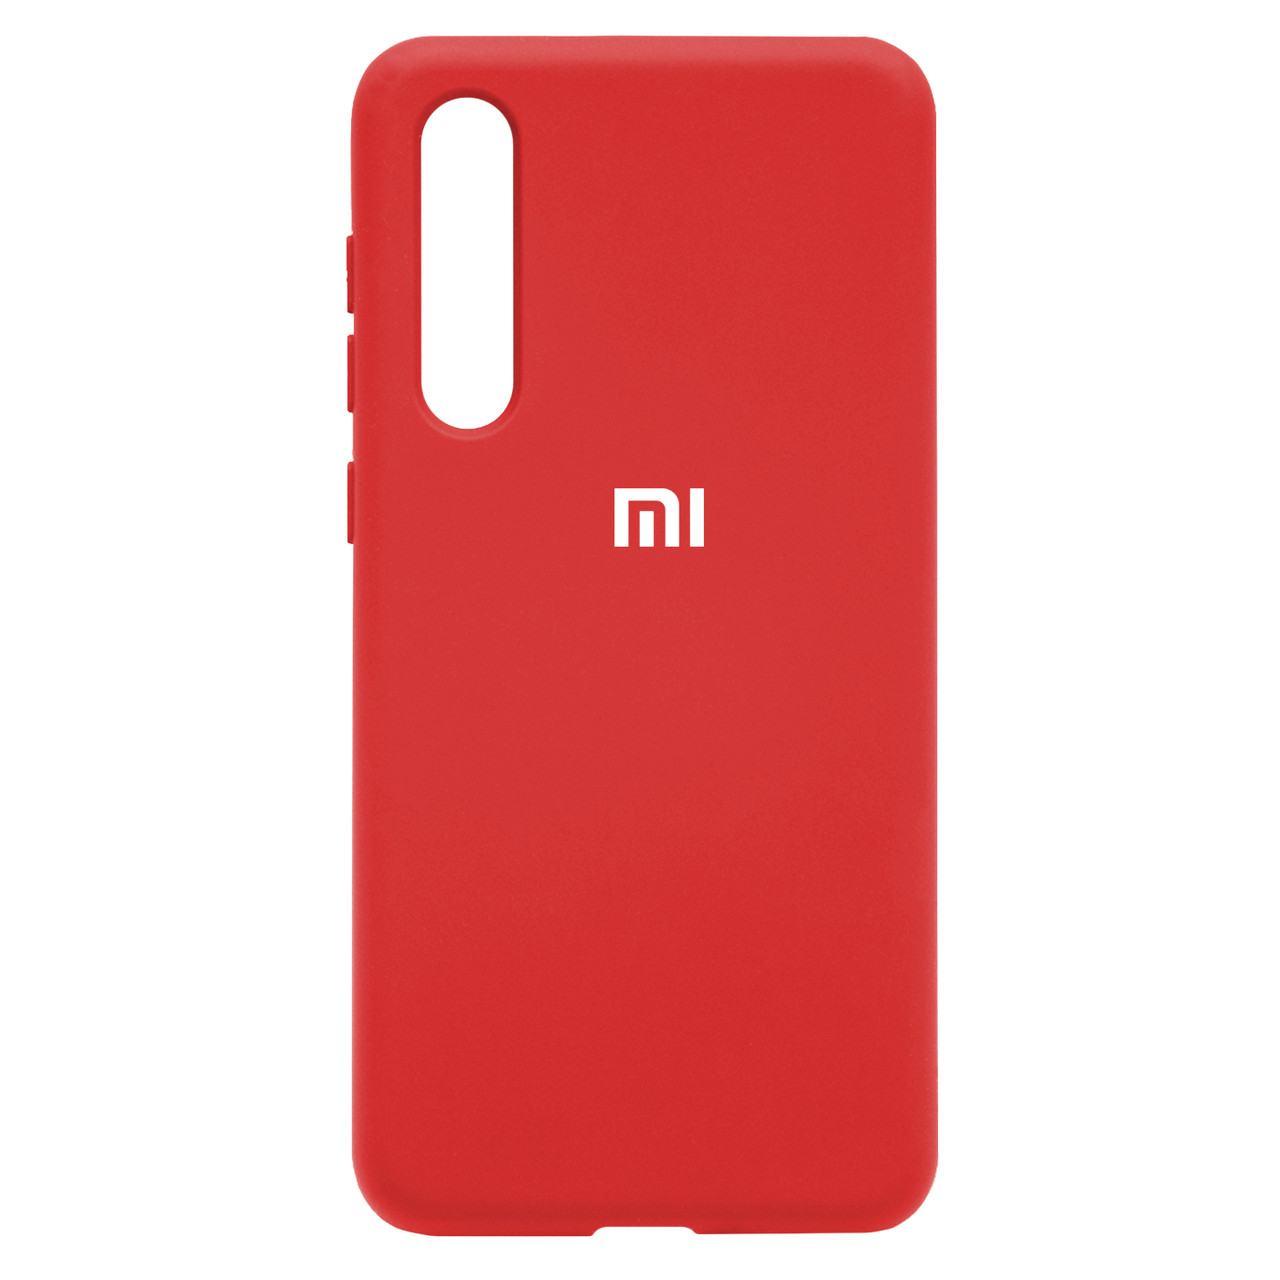 Чехол для Xiaomi MI 9 SE back cover Silky and soft-touch Silicone Cover, Red - фото 1 - id-p115053773